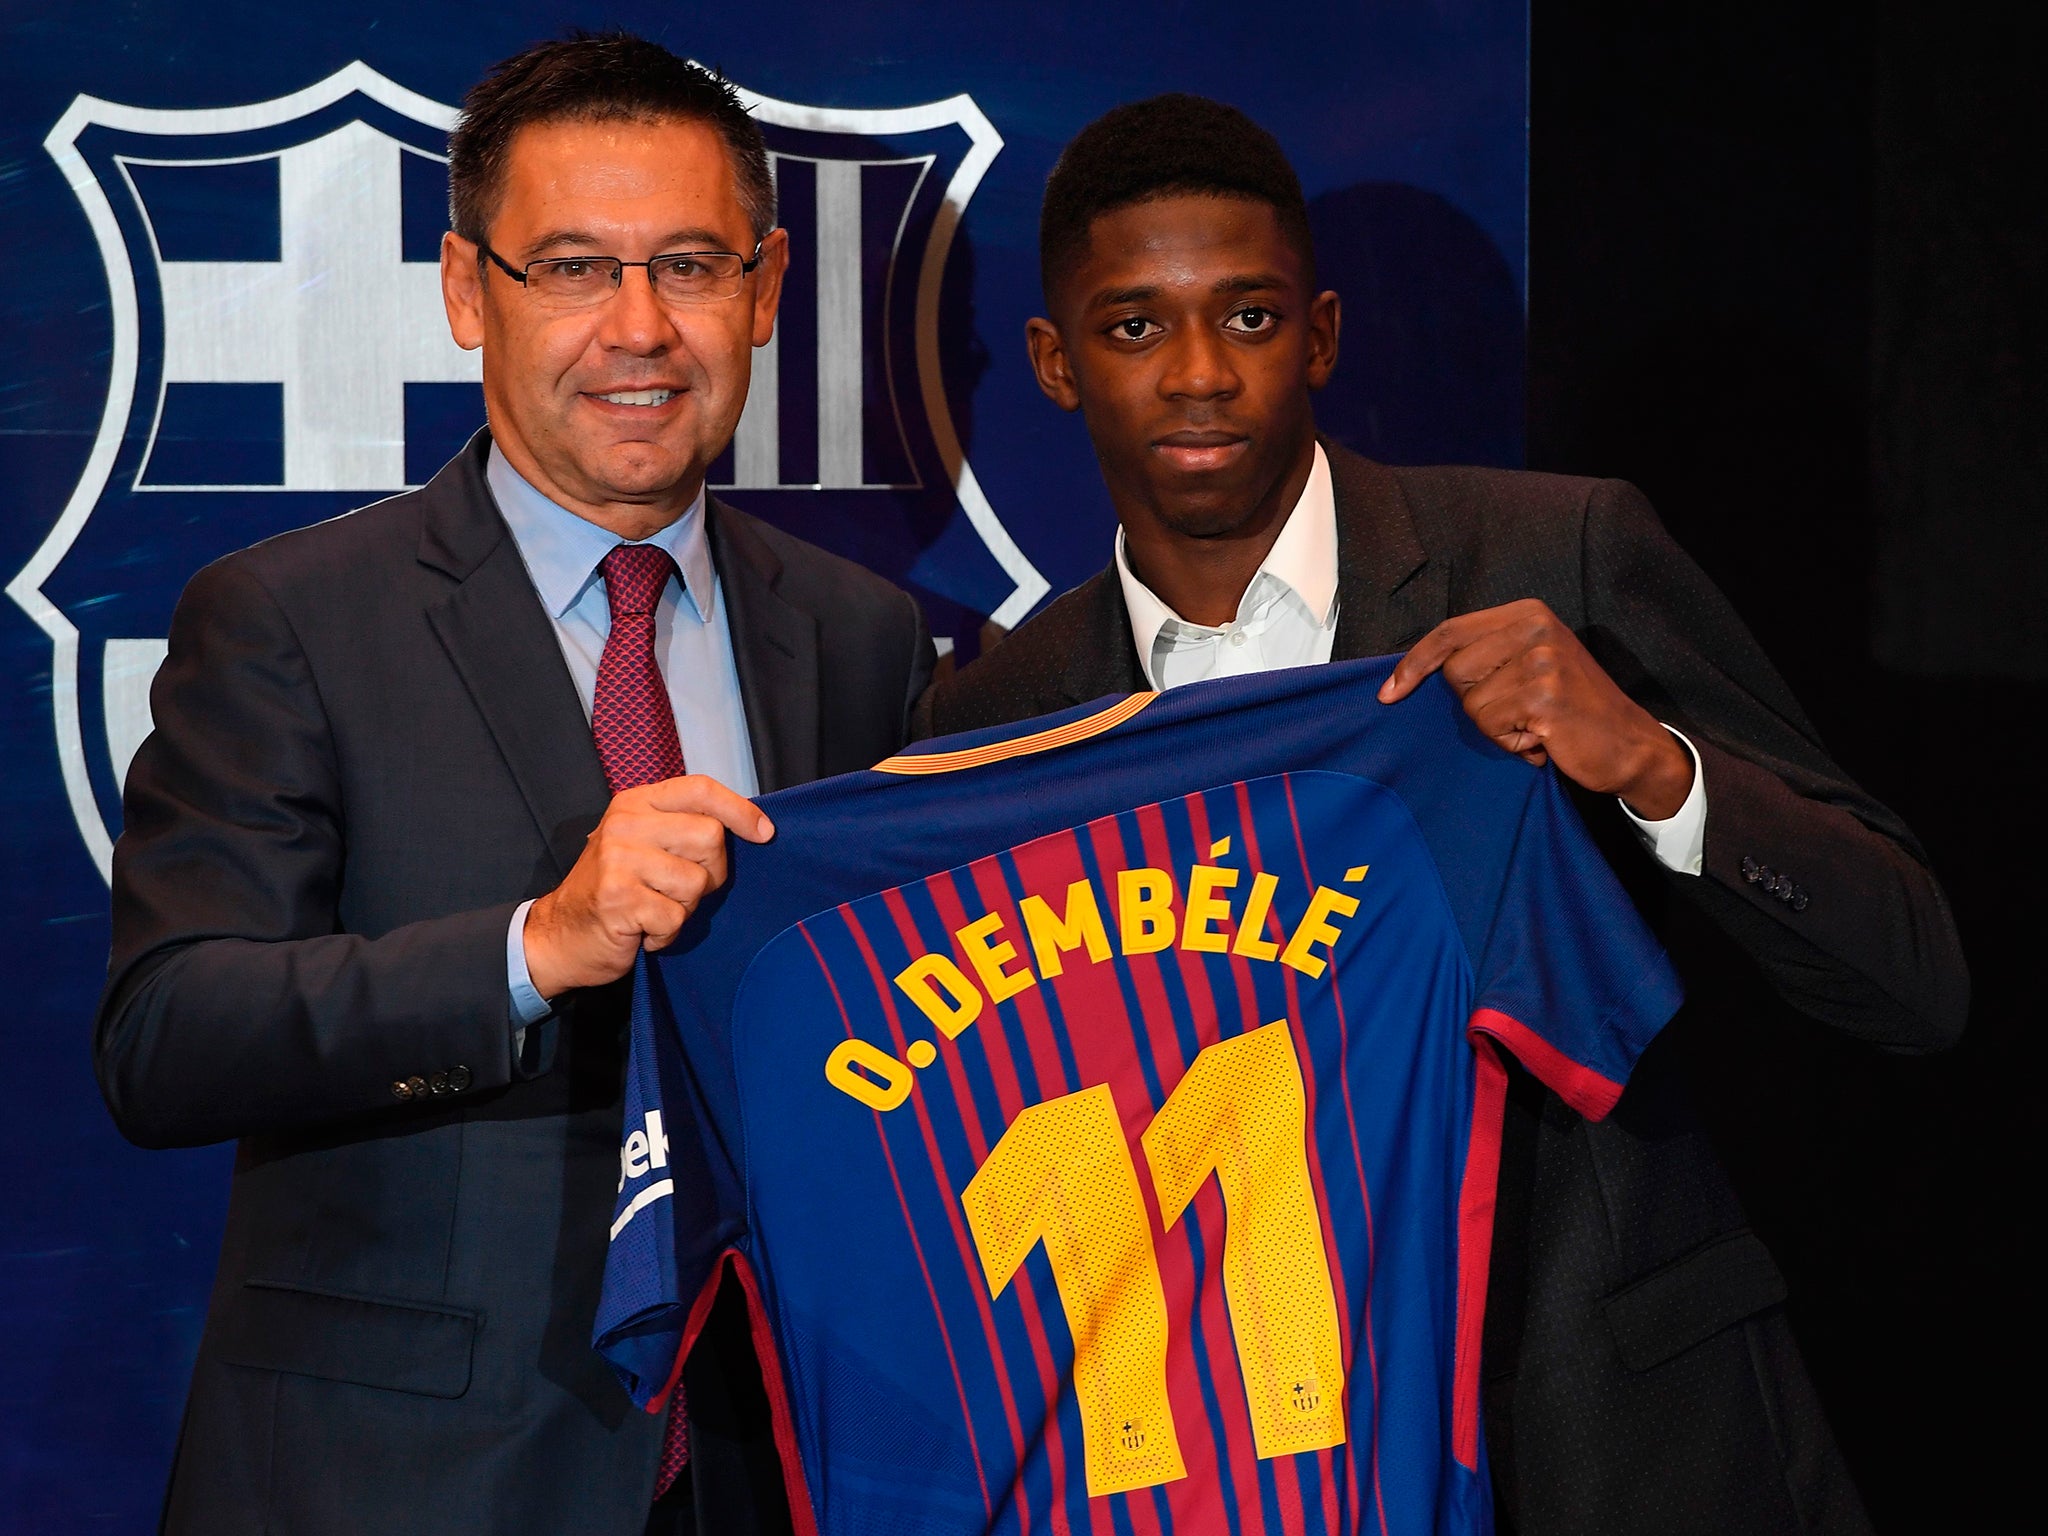 Ousmane Dembele was unveiled by Josep Bartomeu as a Barcelona player on Monday